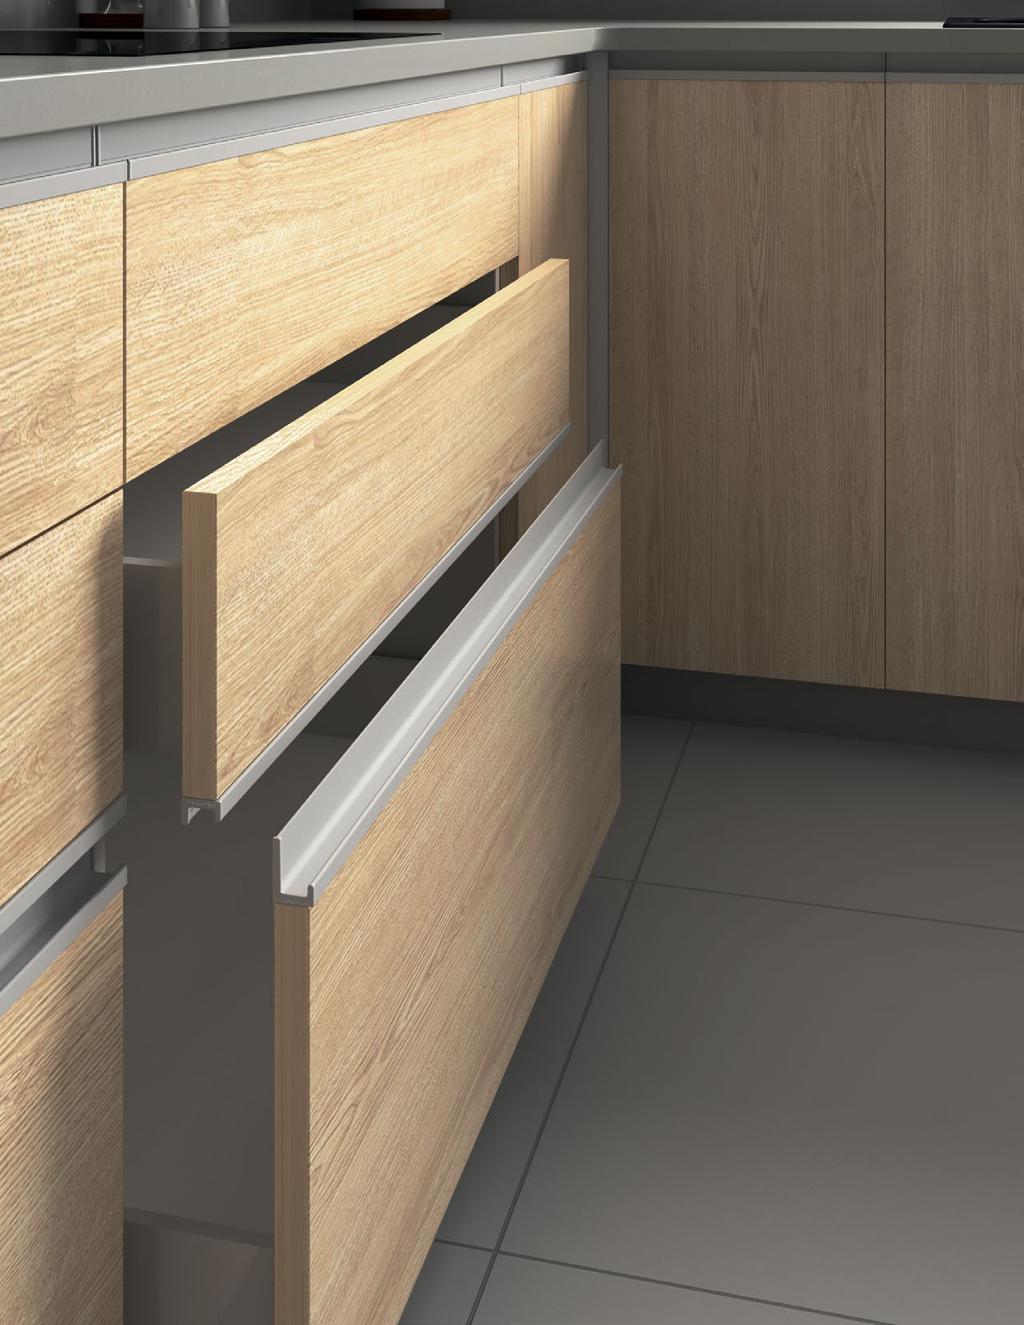 INTEGRATED HANDLE DOORS ELEGANTLY REFINED Integrated handle doors deliver a clean, streamlined look with minimal to no projection.